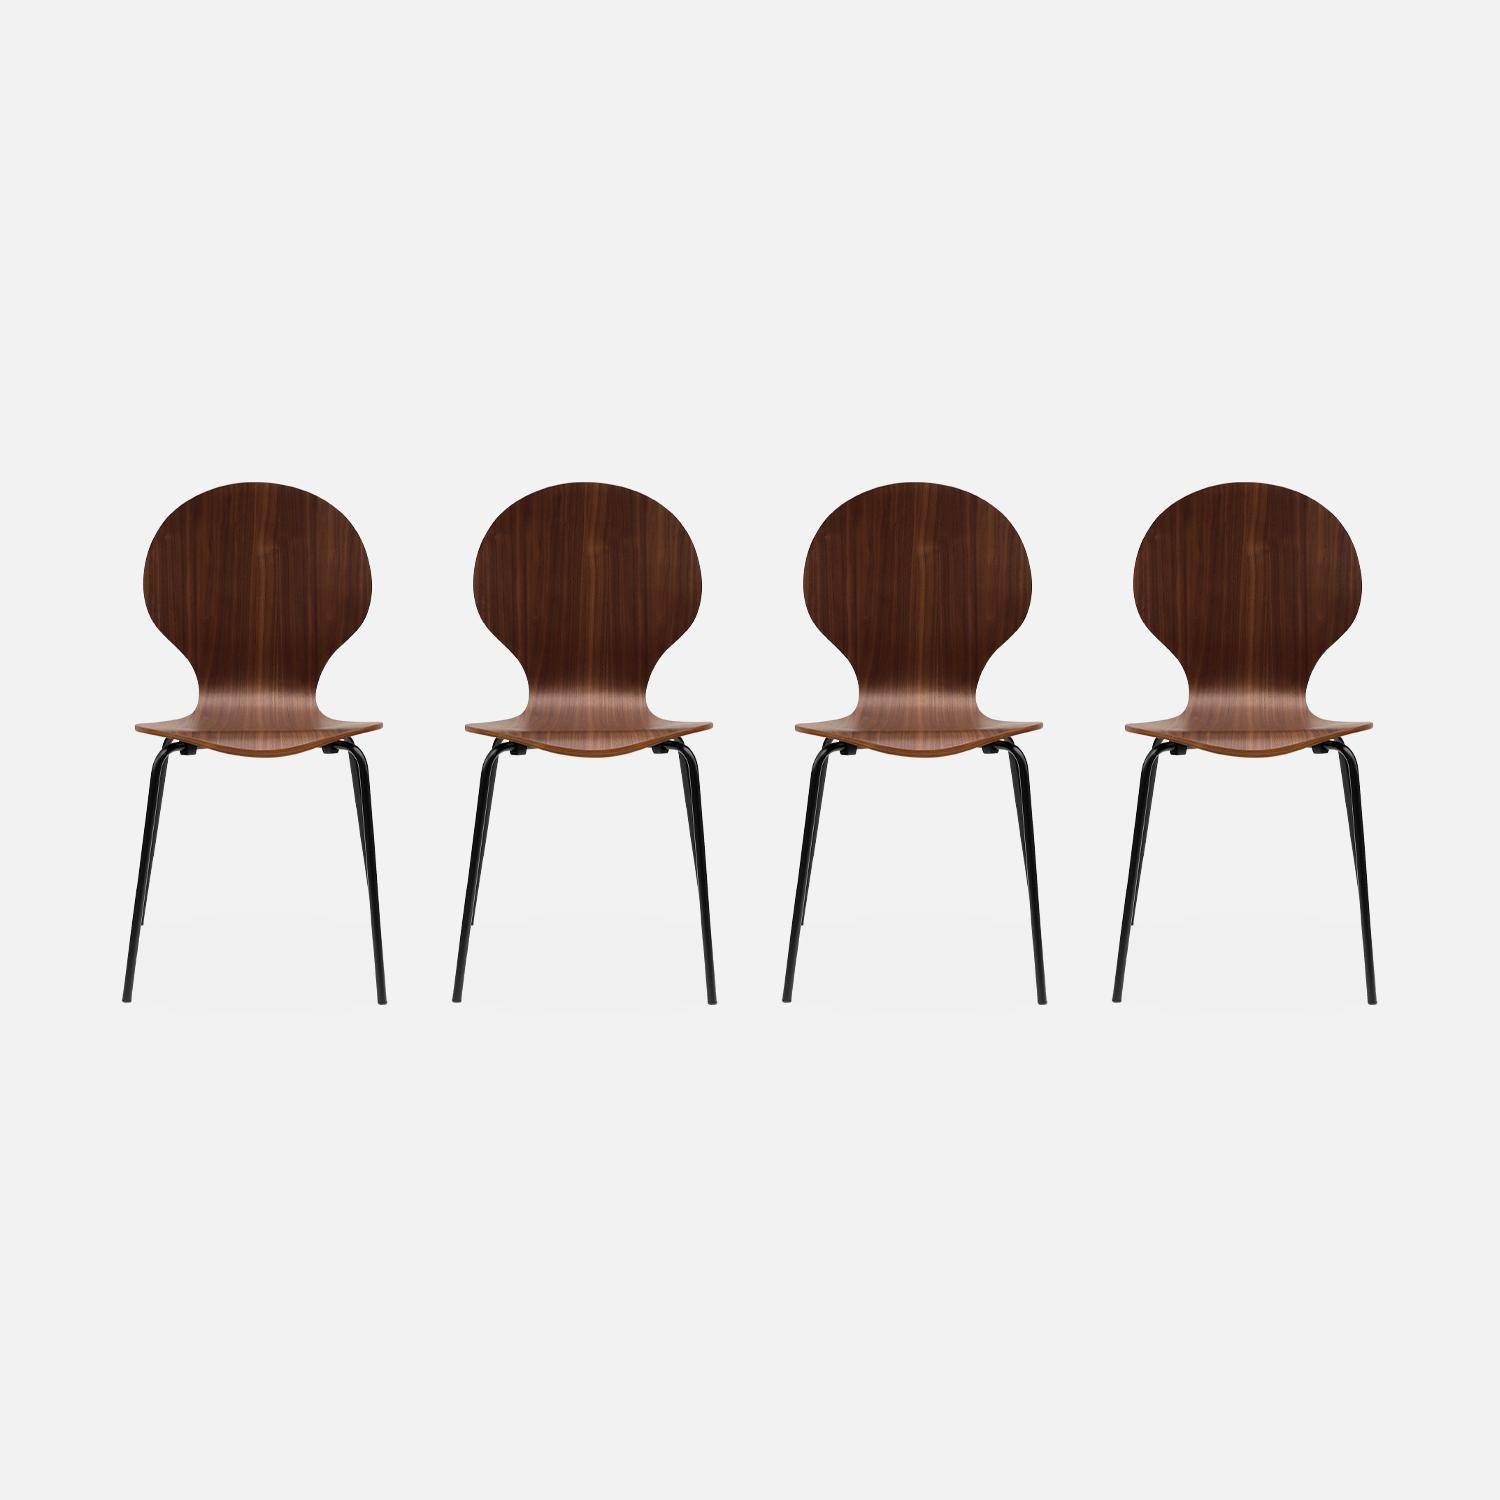 Set of 4 stackable Retro Chairs, Wood and Plywood, L43xW48xH87cm, brown Photo3